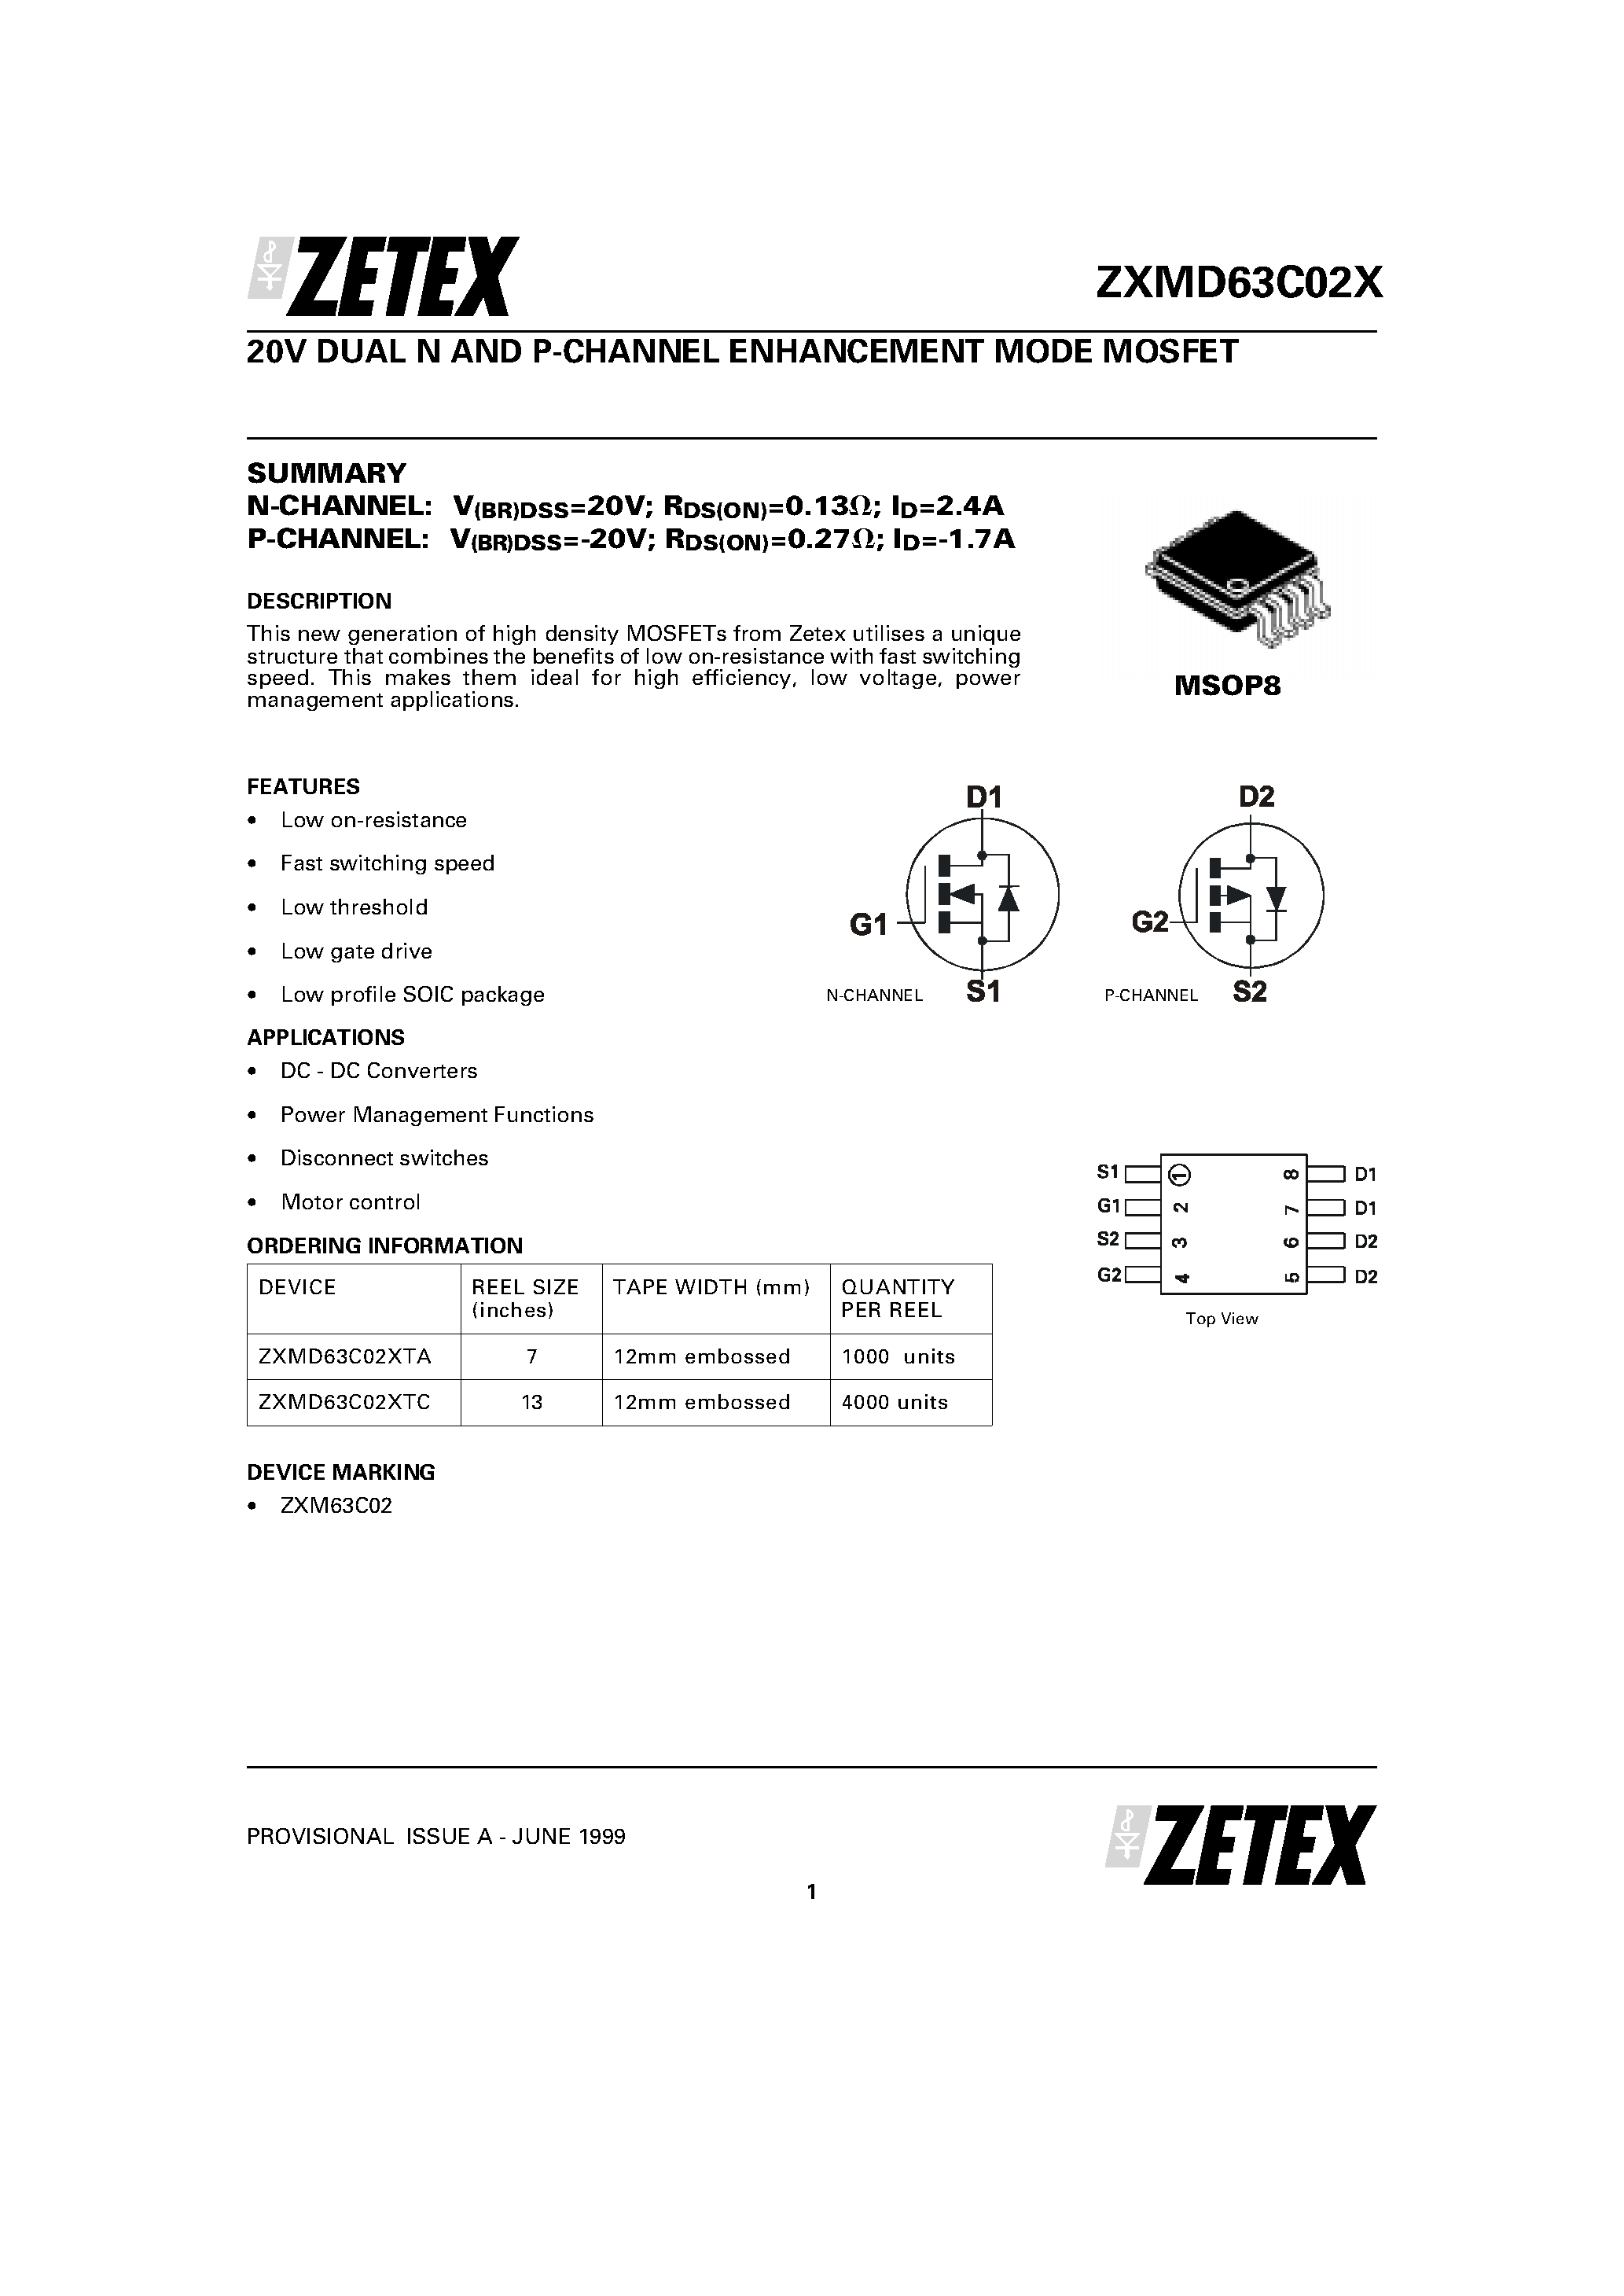 Datasheet ZXMD63C02X - 20V DUAL N AND P-CHANNEL ENHANCEMENT MODE MOSFET page 1